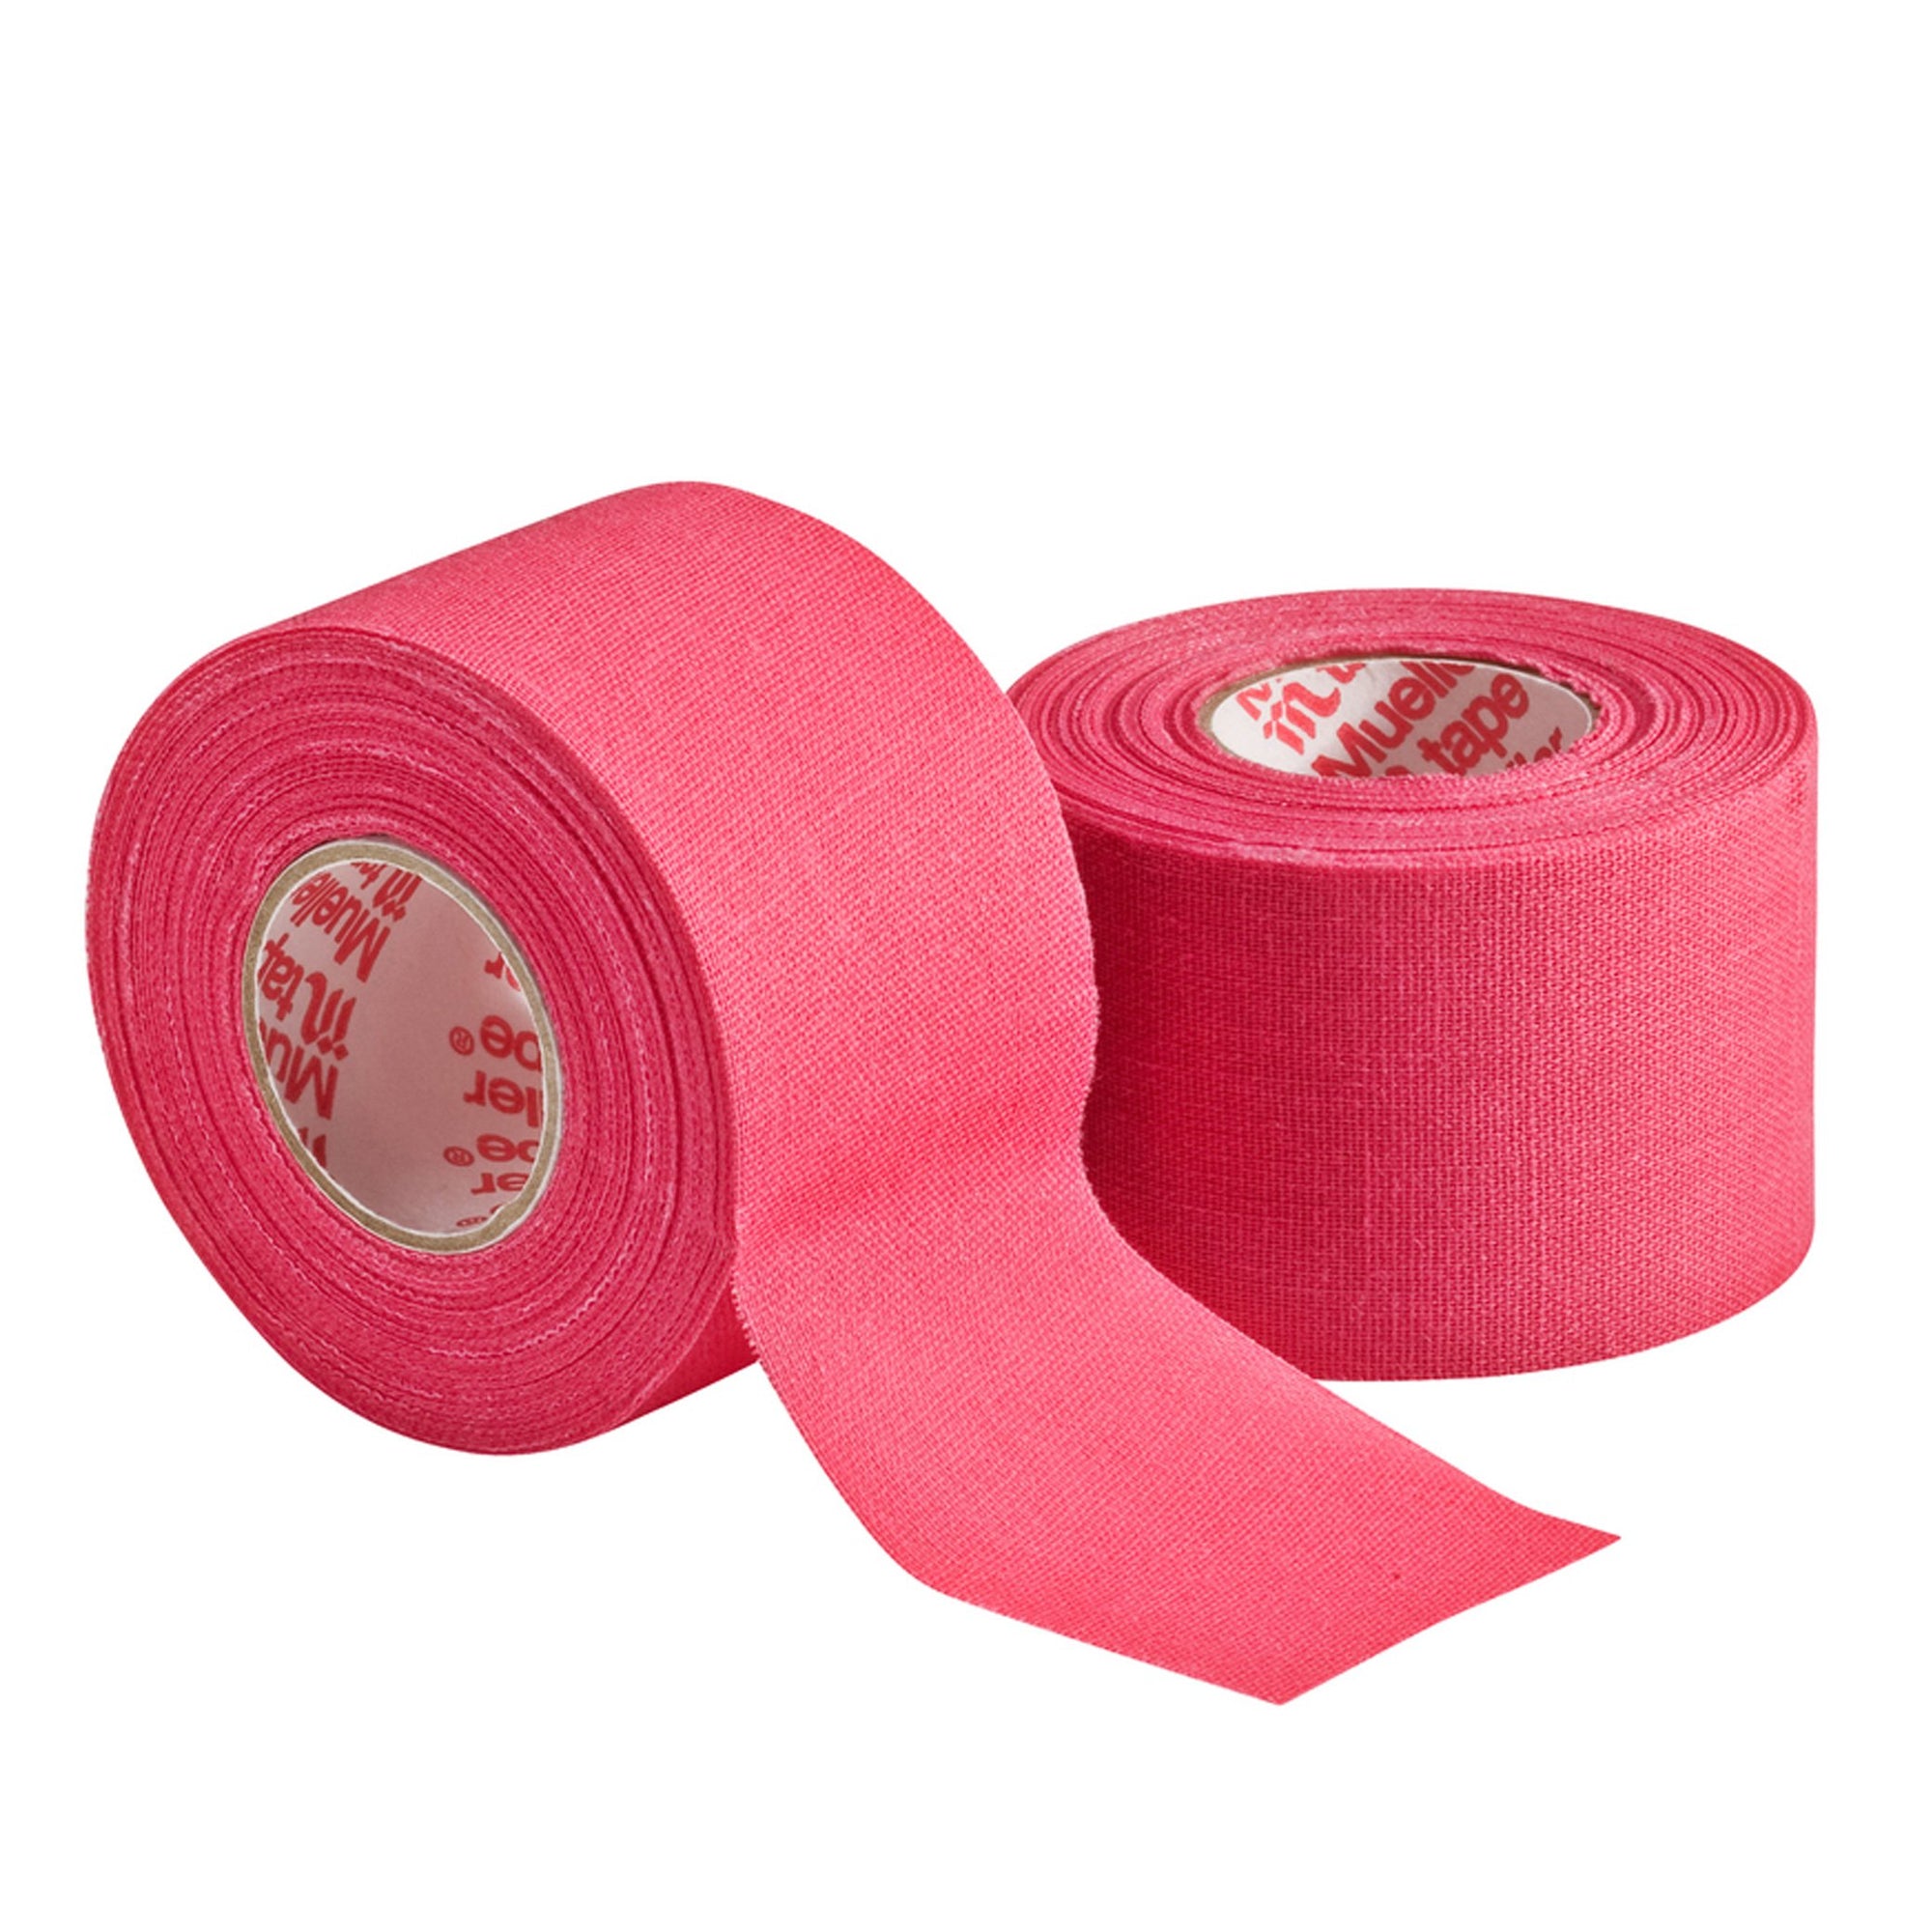 Rugby Imports Mueller Colored Athletic Tape - MTape